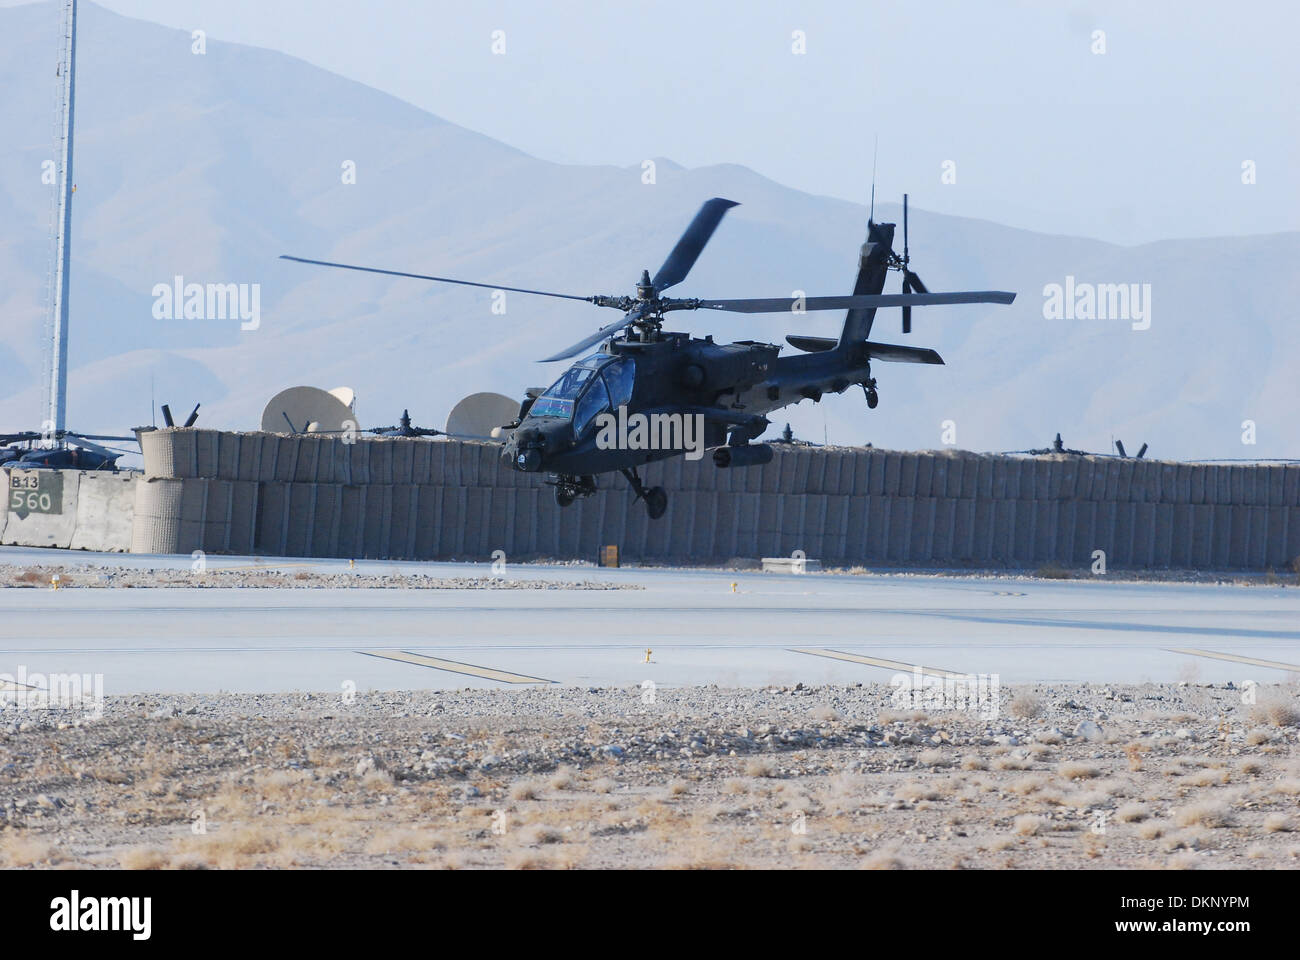 An AH-64 Apache helicopter from 2nd Battalion (Assault), 10th Combat Aviation Brigade, Task Force Knighthawk, departs Forward Operating Base Shank, Afghanistan, Dec. 4, to conduct a security and reconnaissance mission over Logar Province. Stock Photo